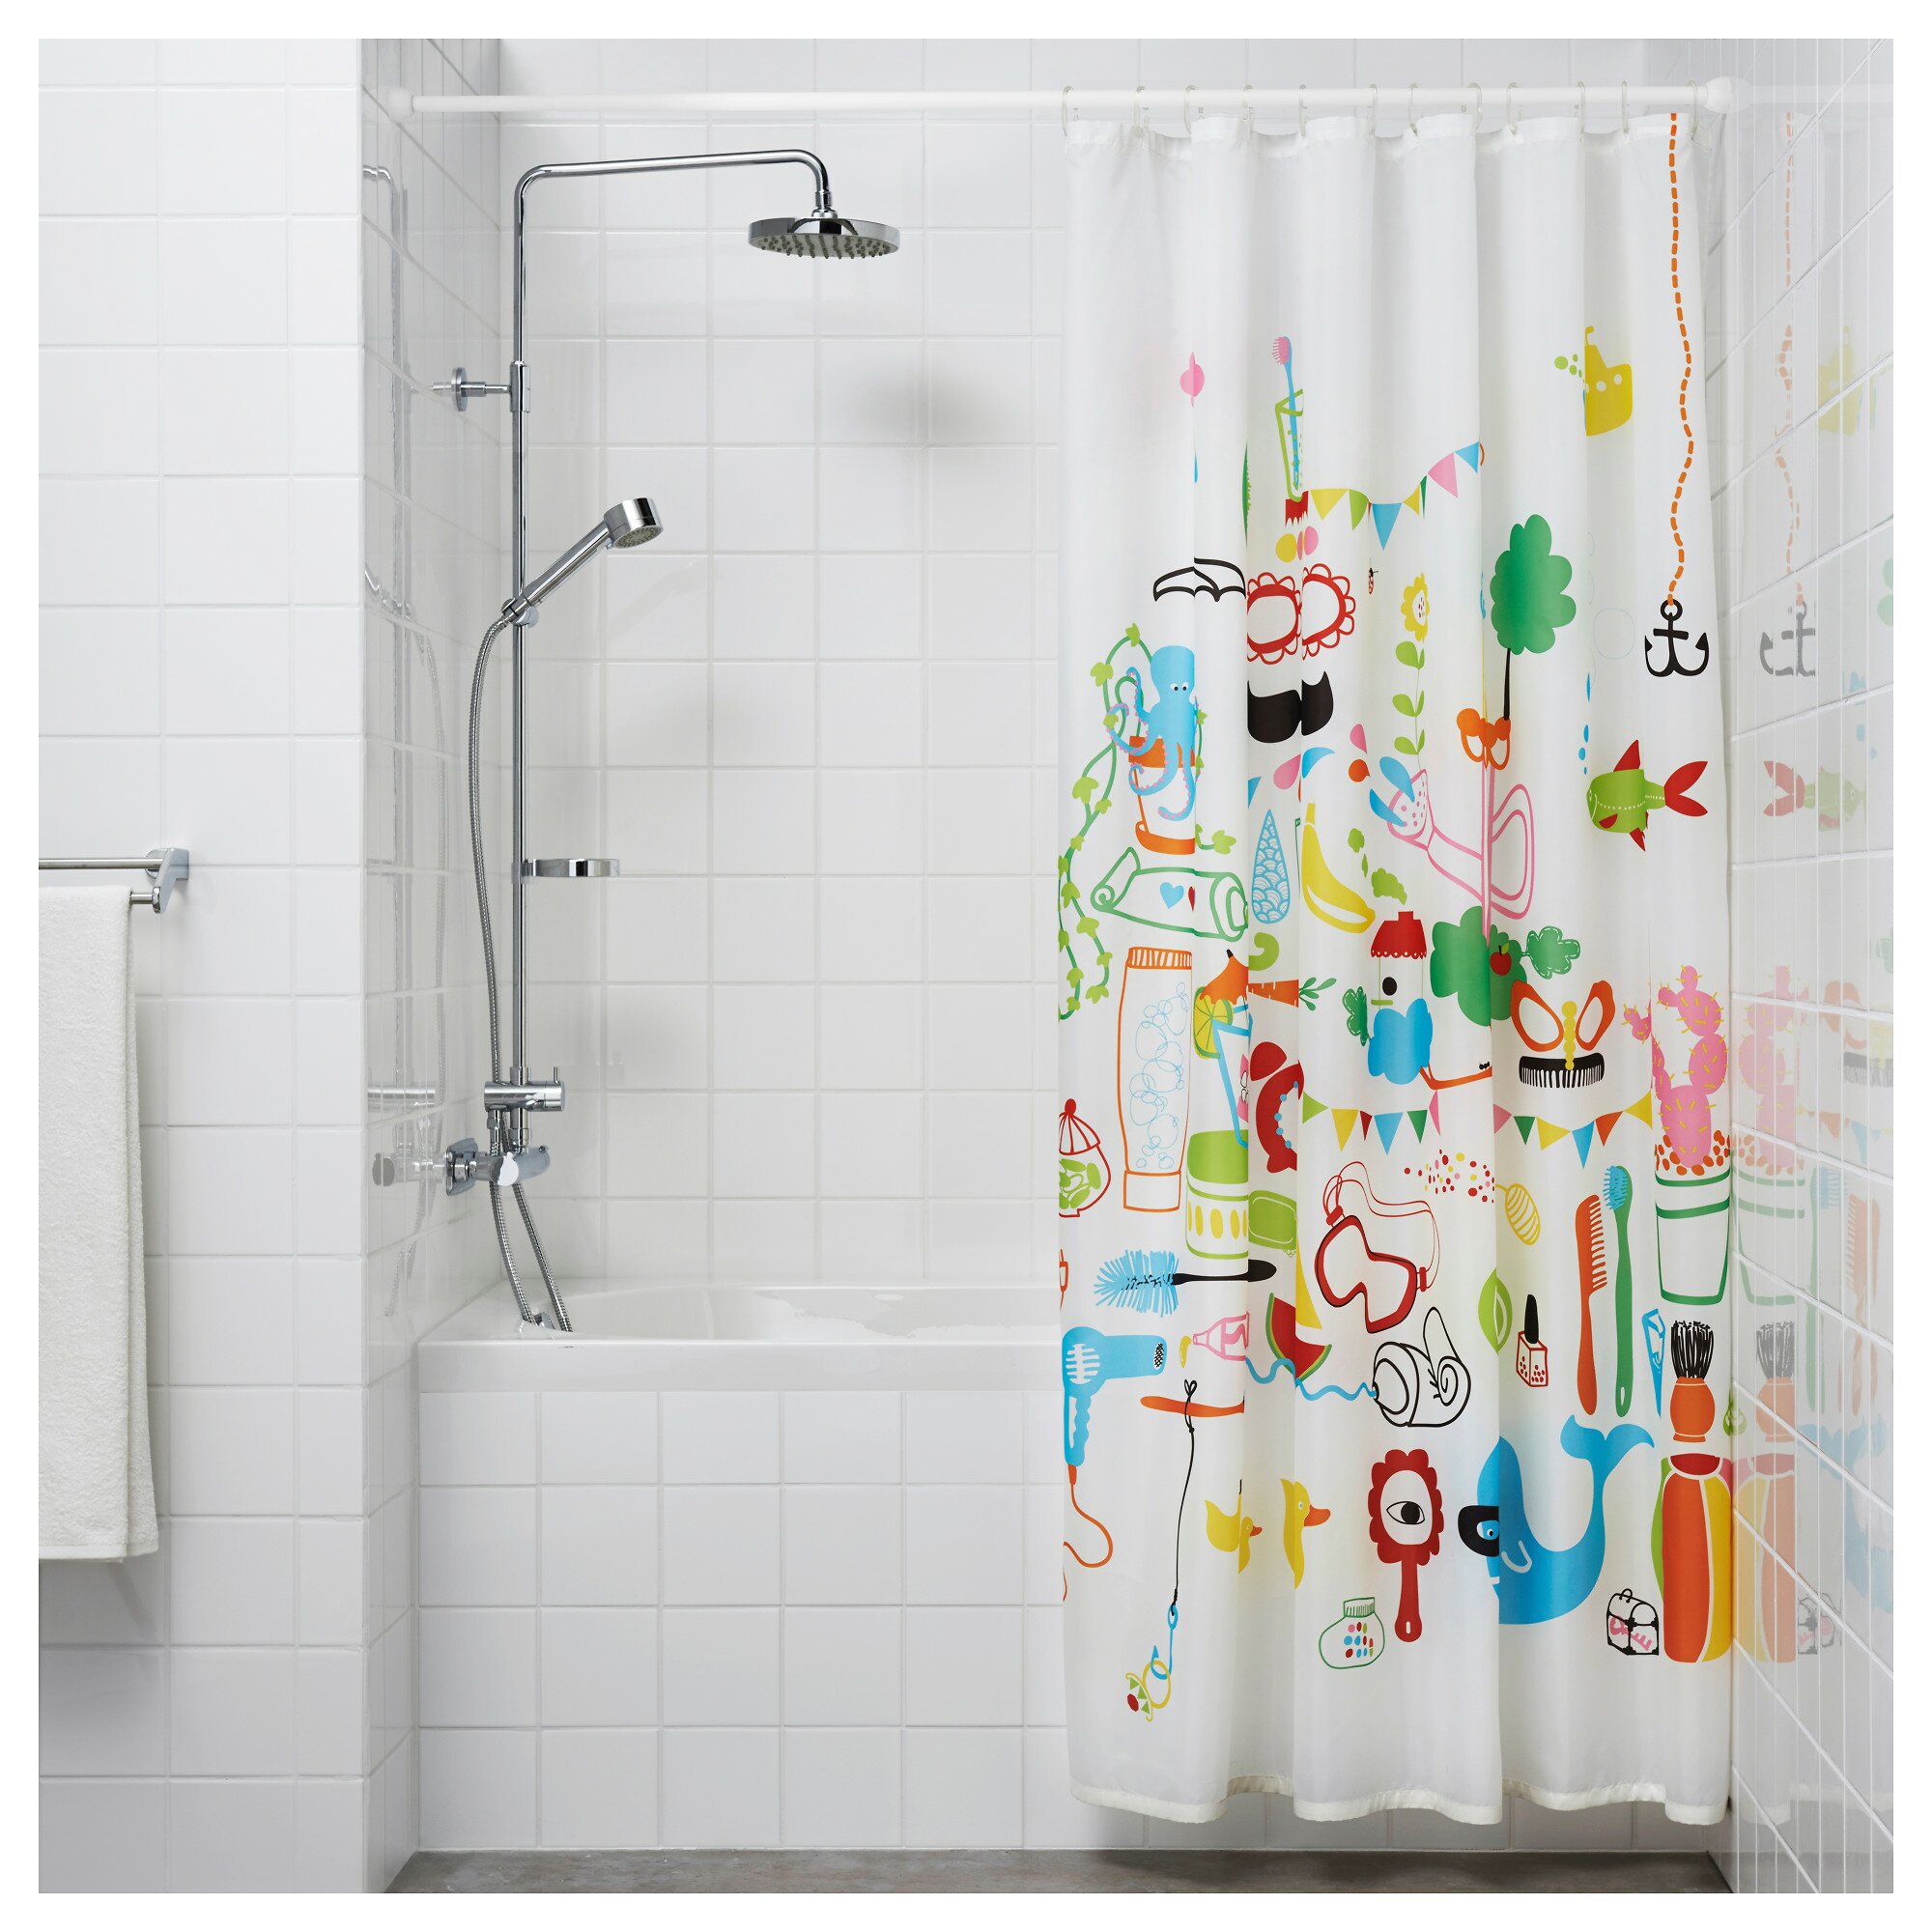 Ikea Shower Curtain for Best Your Bathroom Decoration: Ikea Shower Curtain | Neon Shower Curtain | Cheap Shower Curtains